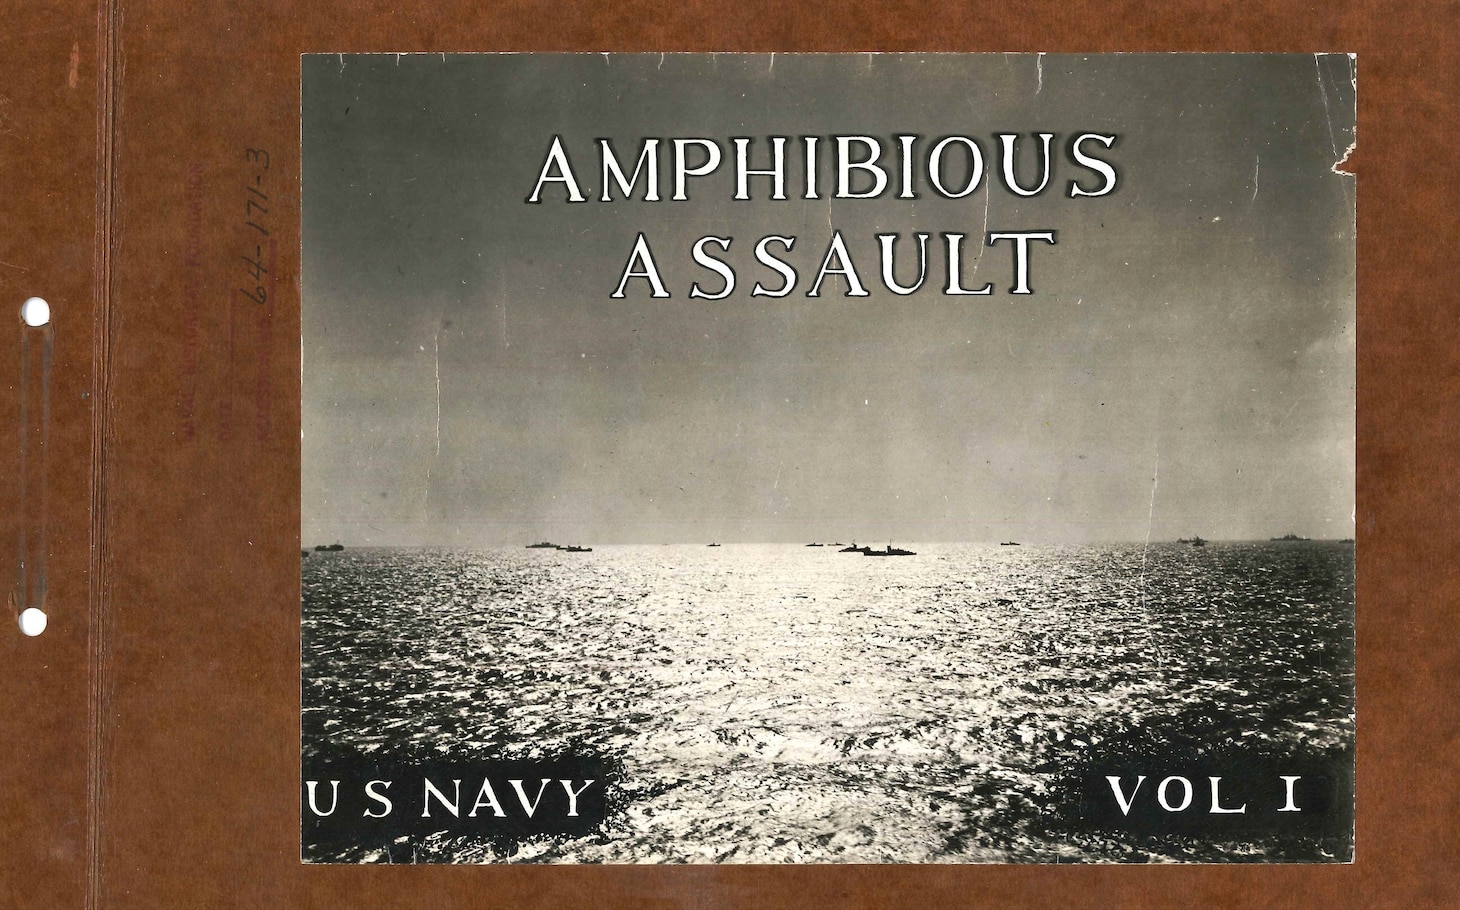 The leather cover of the rawhide-bound narrative Amphibious Assault, circa 1944